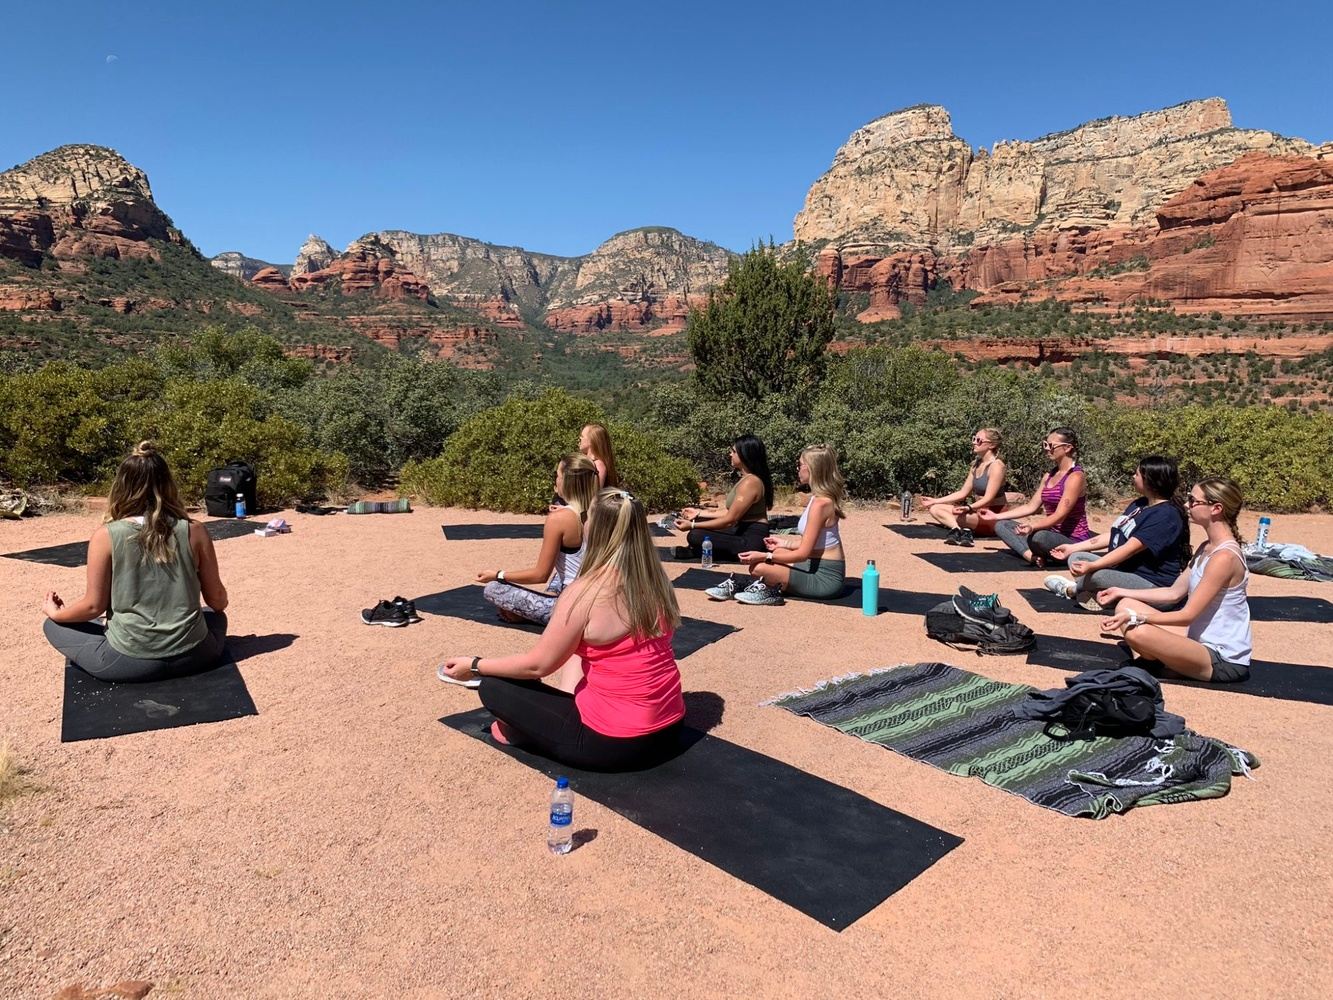 Energy Healing & Serenity in Sedona- A Weekend of Wellness & Recovery